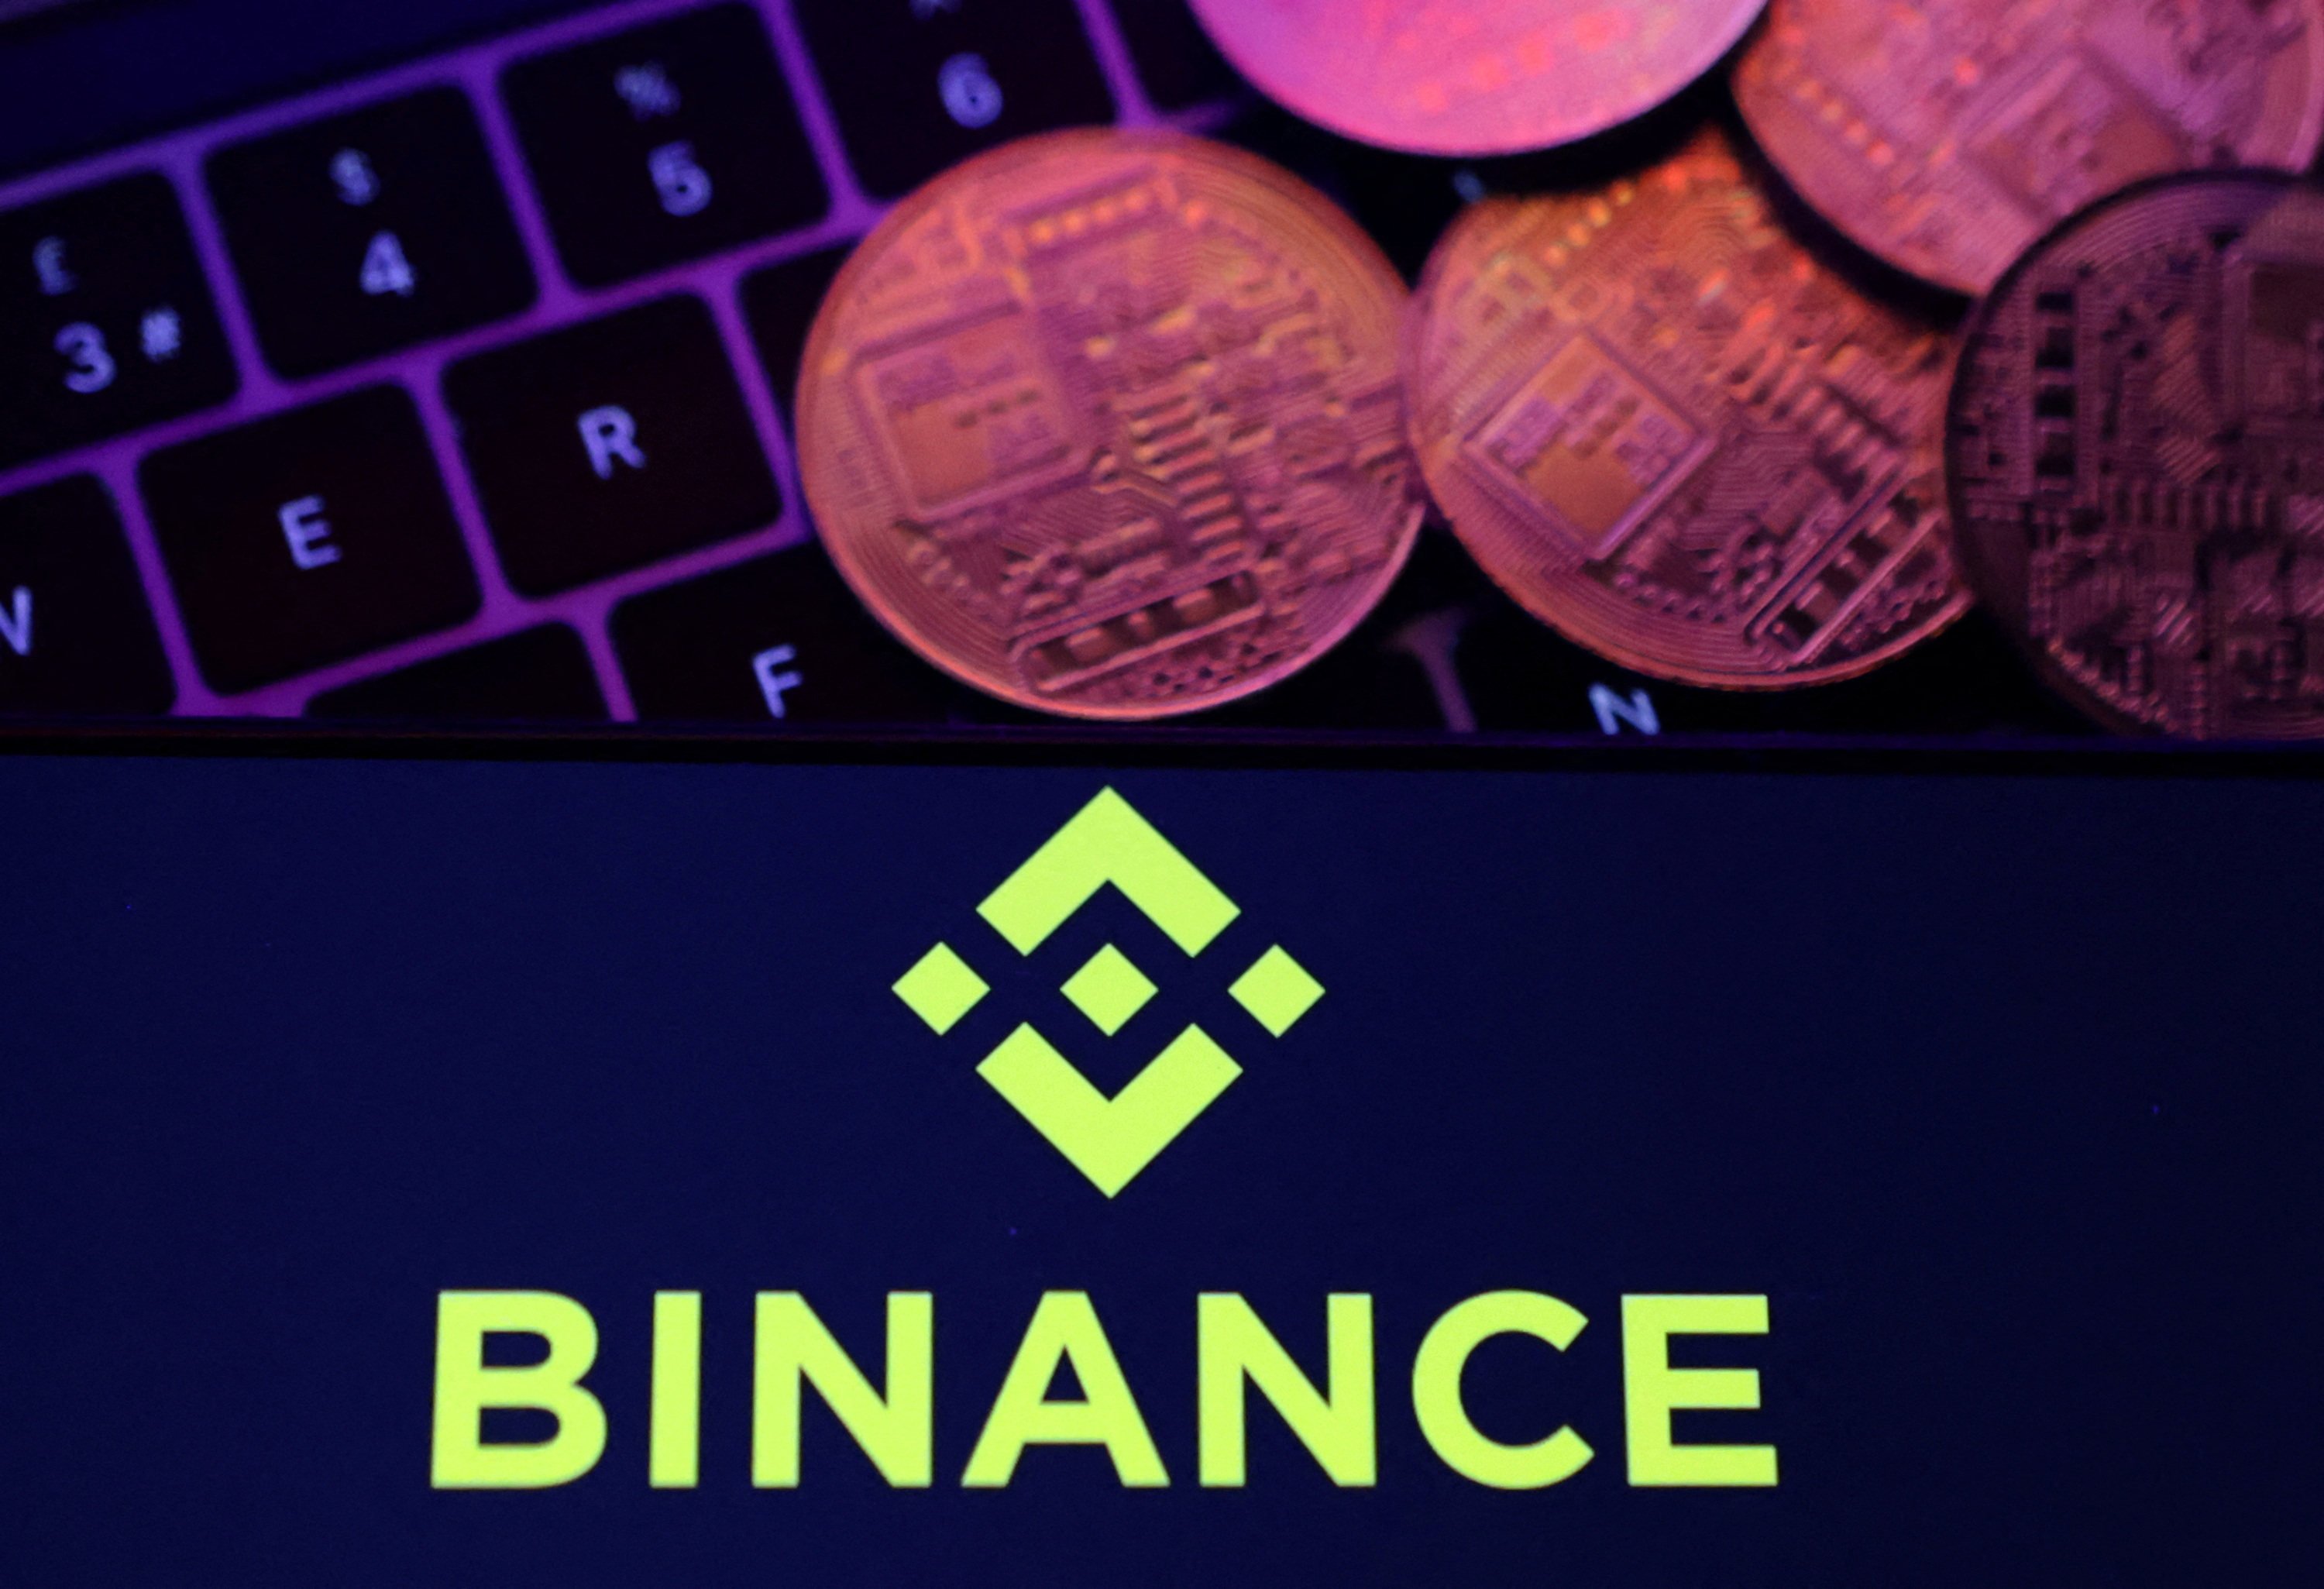 The Binance logo and a representation of cryptocurrencies are placed on a keyboard in this illustration, November 8, 2022. Photo: Reuters